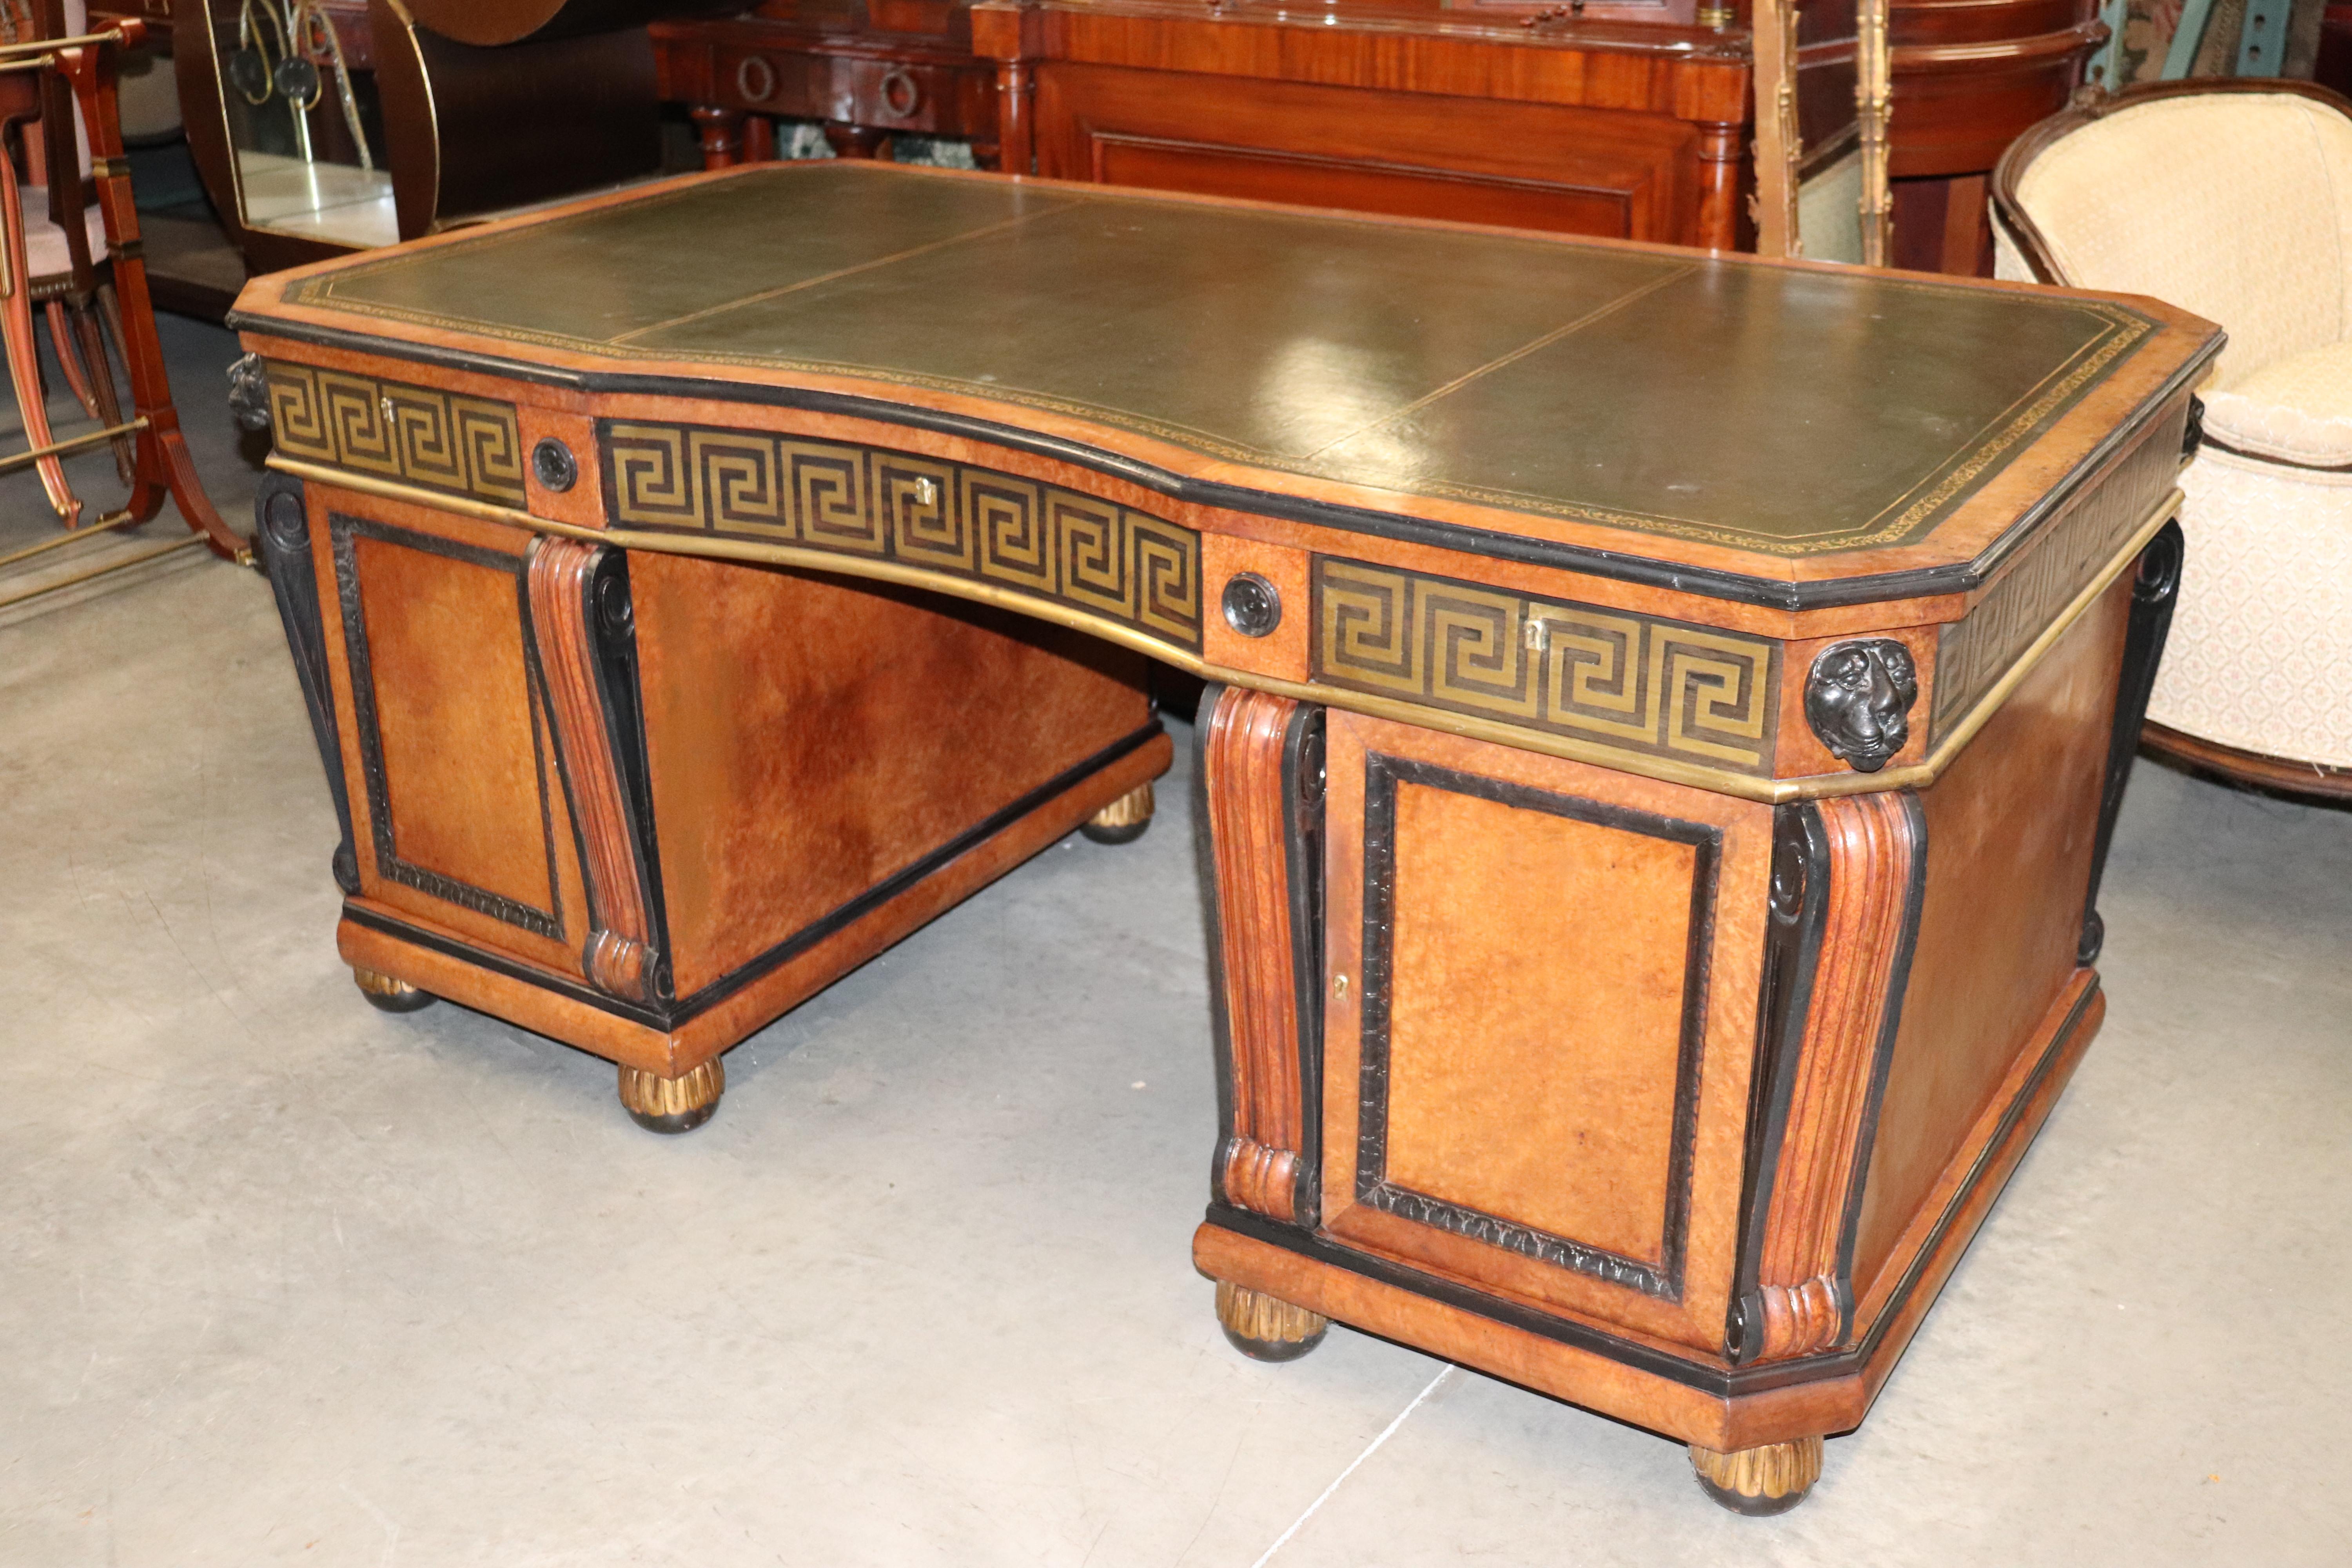 This is a gorgeous brass inlaid desk with Greek key motif. The desk is made of burled walnut and features lion heads on each corner. The desk measures 31 tall x 67 wide x 37 deep.